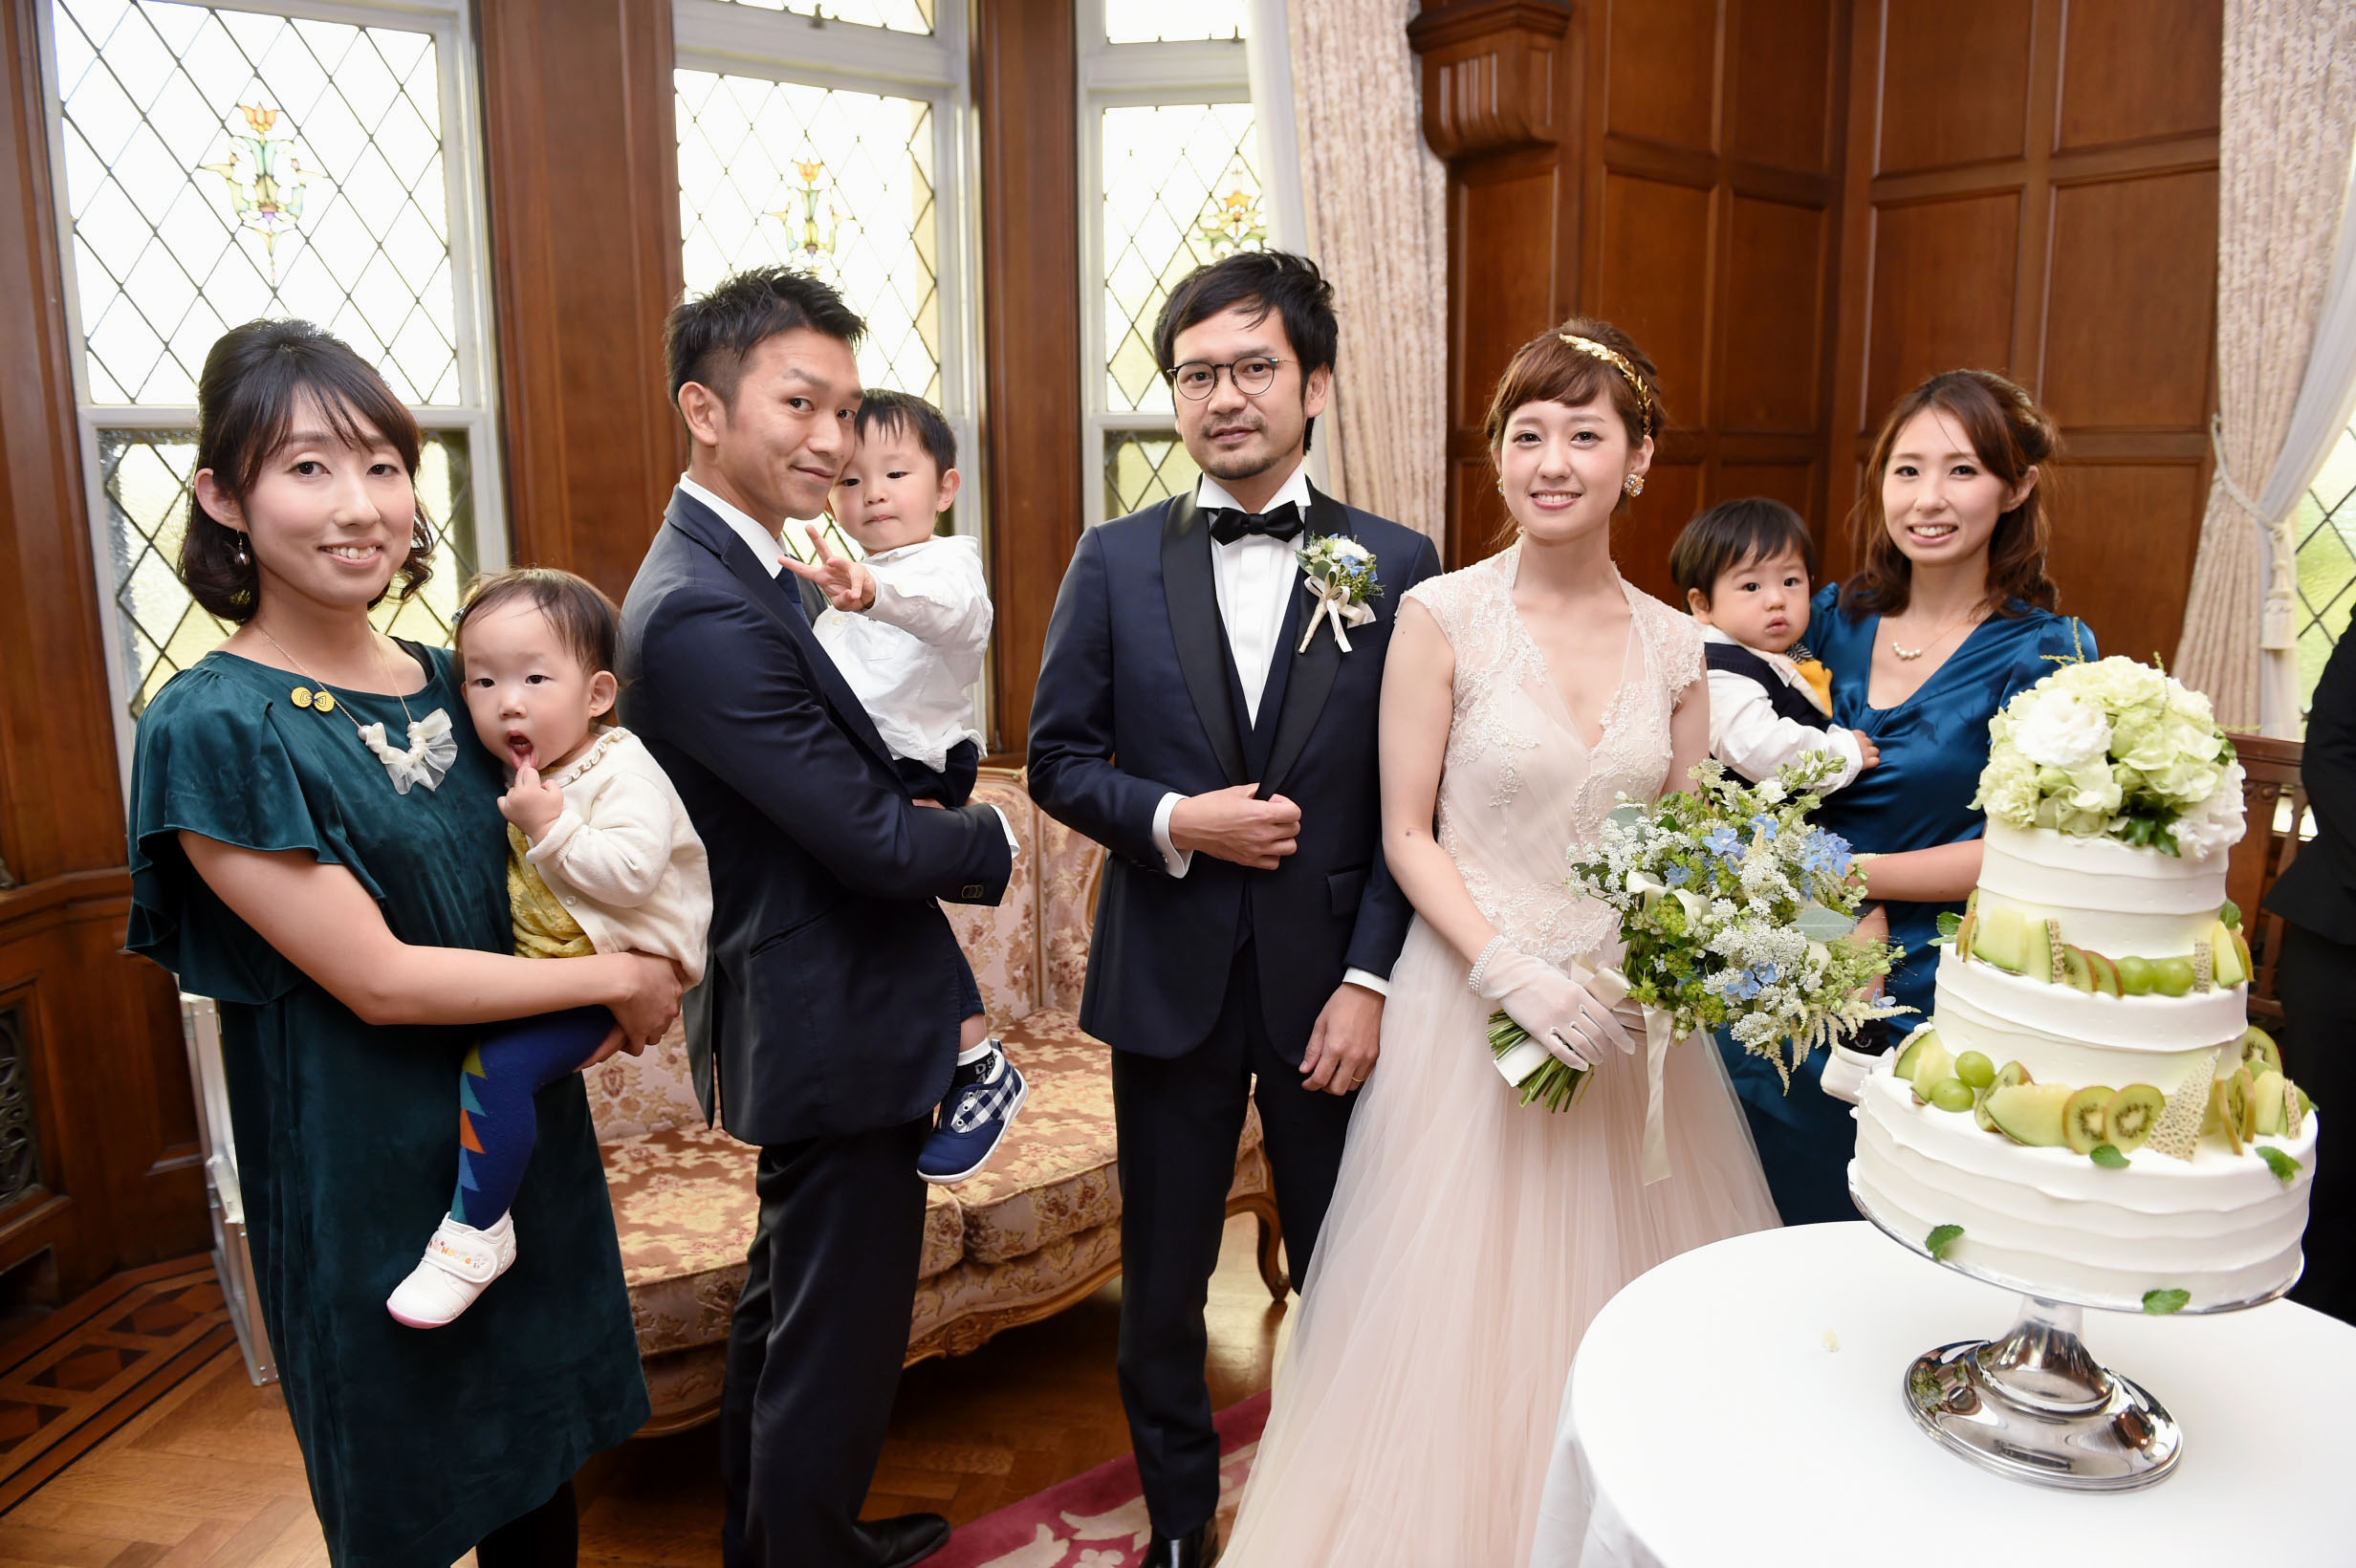 Japan wedding planners find growth in shrinking wedding parties